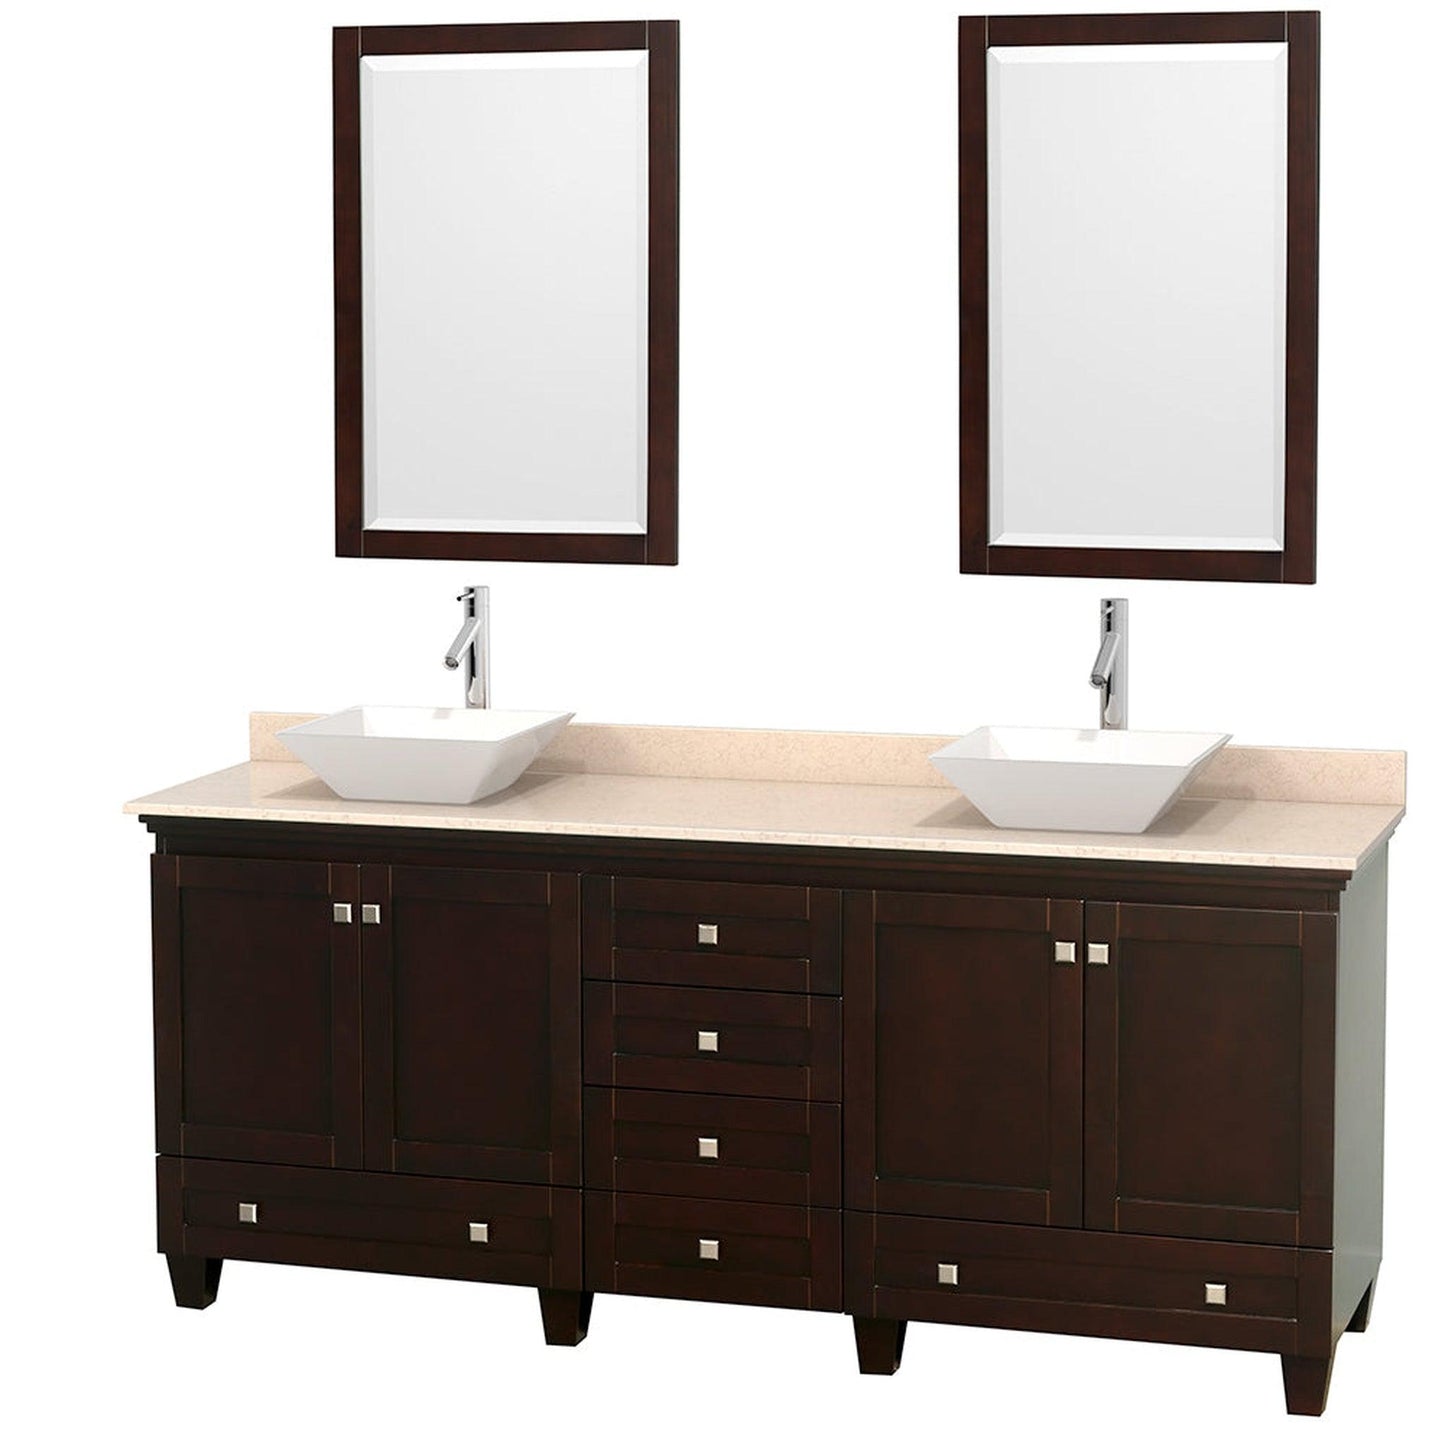 Wyndham Collection Acclaim 80" Double Bathroom Vanity in Espresso With Ivory Marble Countertop, Pyra White Porcelain Sink & 24" Mirror